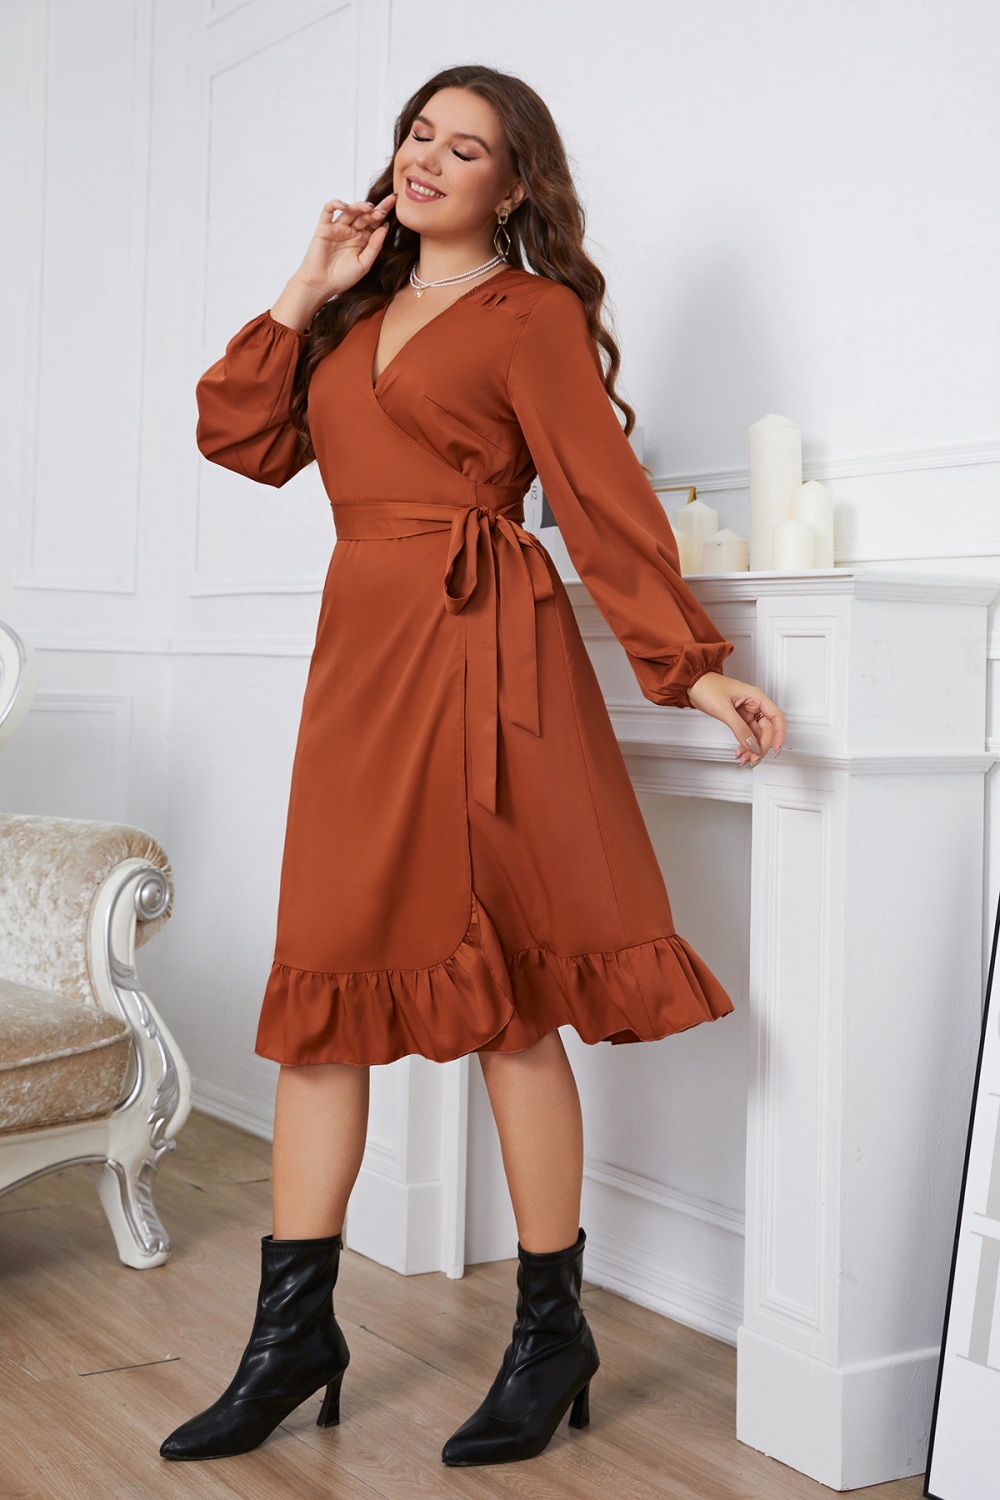 A slice spring and autumn European style dress